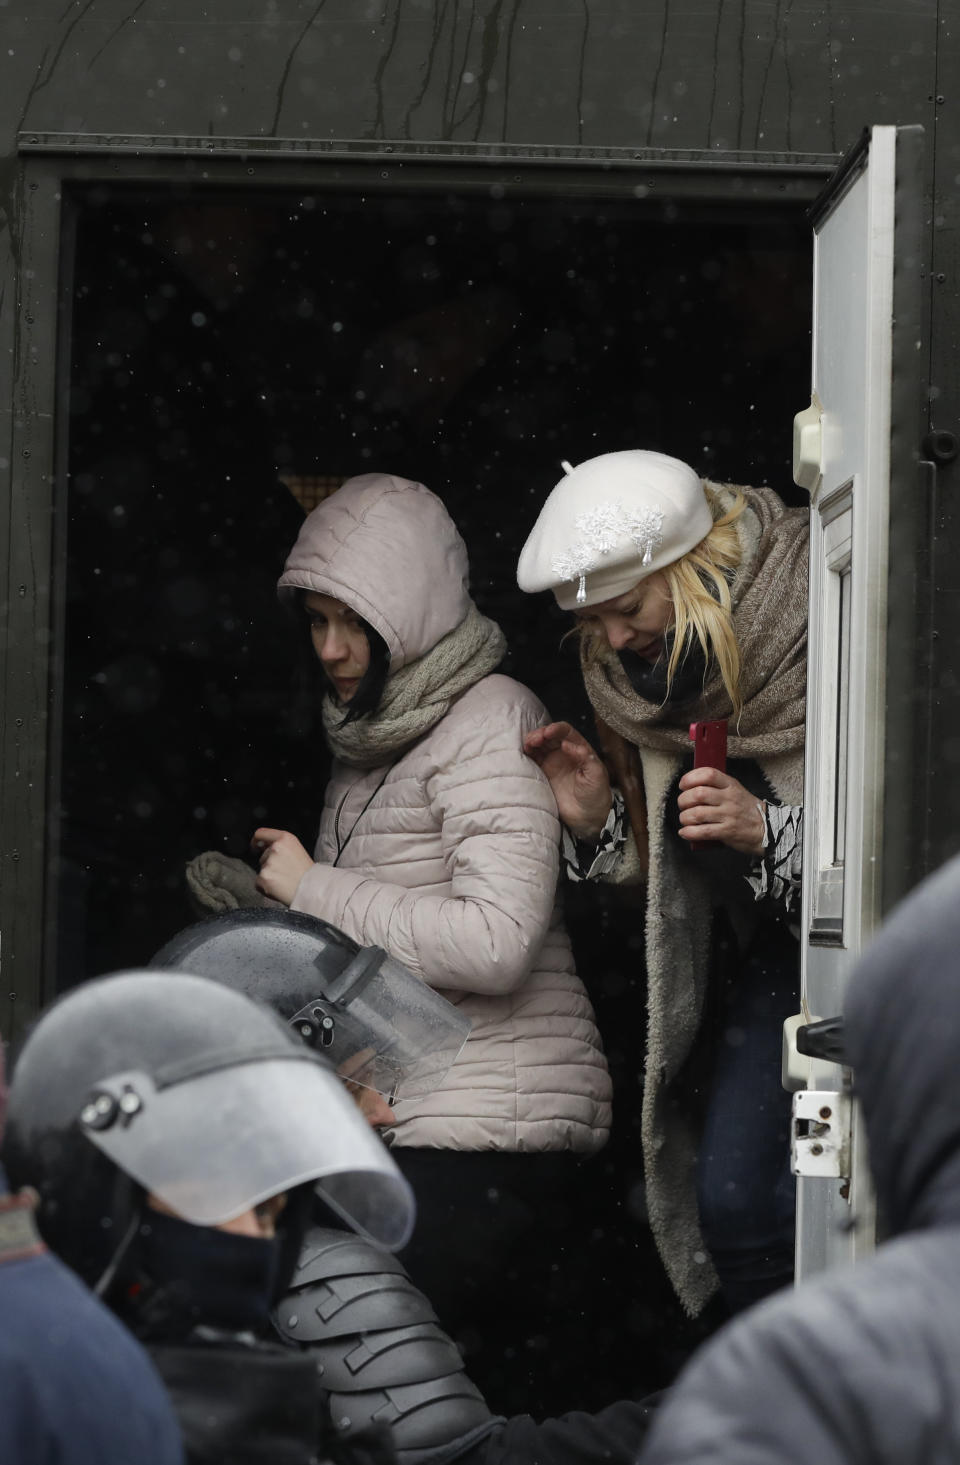 Two women are detained by police during an opposition rally in Minsk, Belarus, Saturday, March 25, 2017. Police in the Belarusian capital have begun wide-scale arrests protesters who had gathered for a forbidden demonstration that they hoped would build on a rising wave of defiance of the former Soviet republic's authoritarian government. (AP Photo/Sergei Grits)